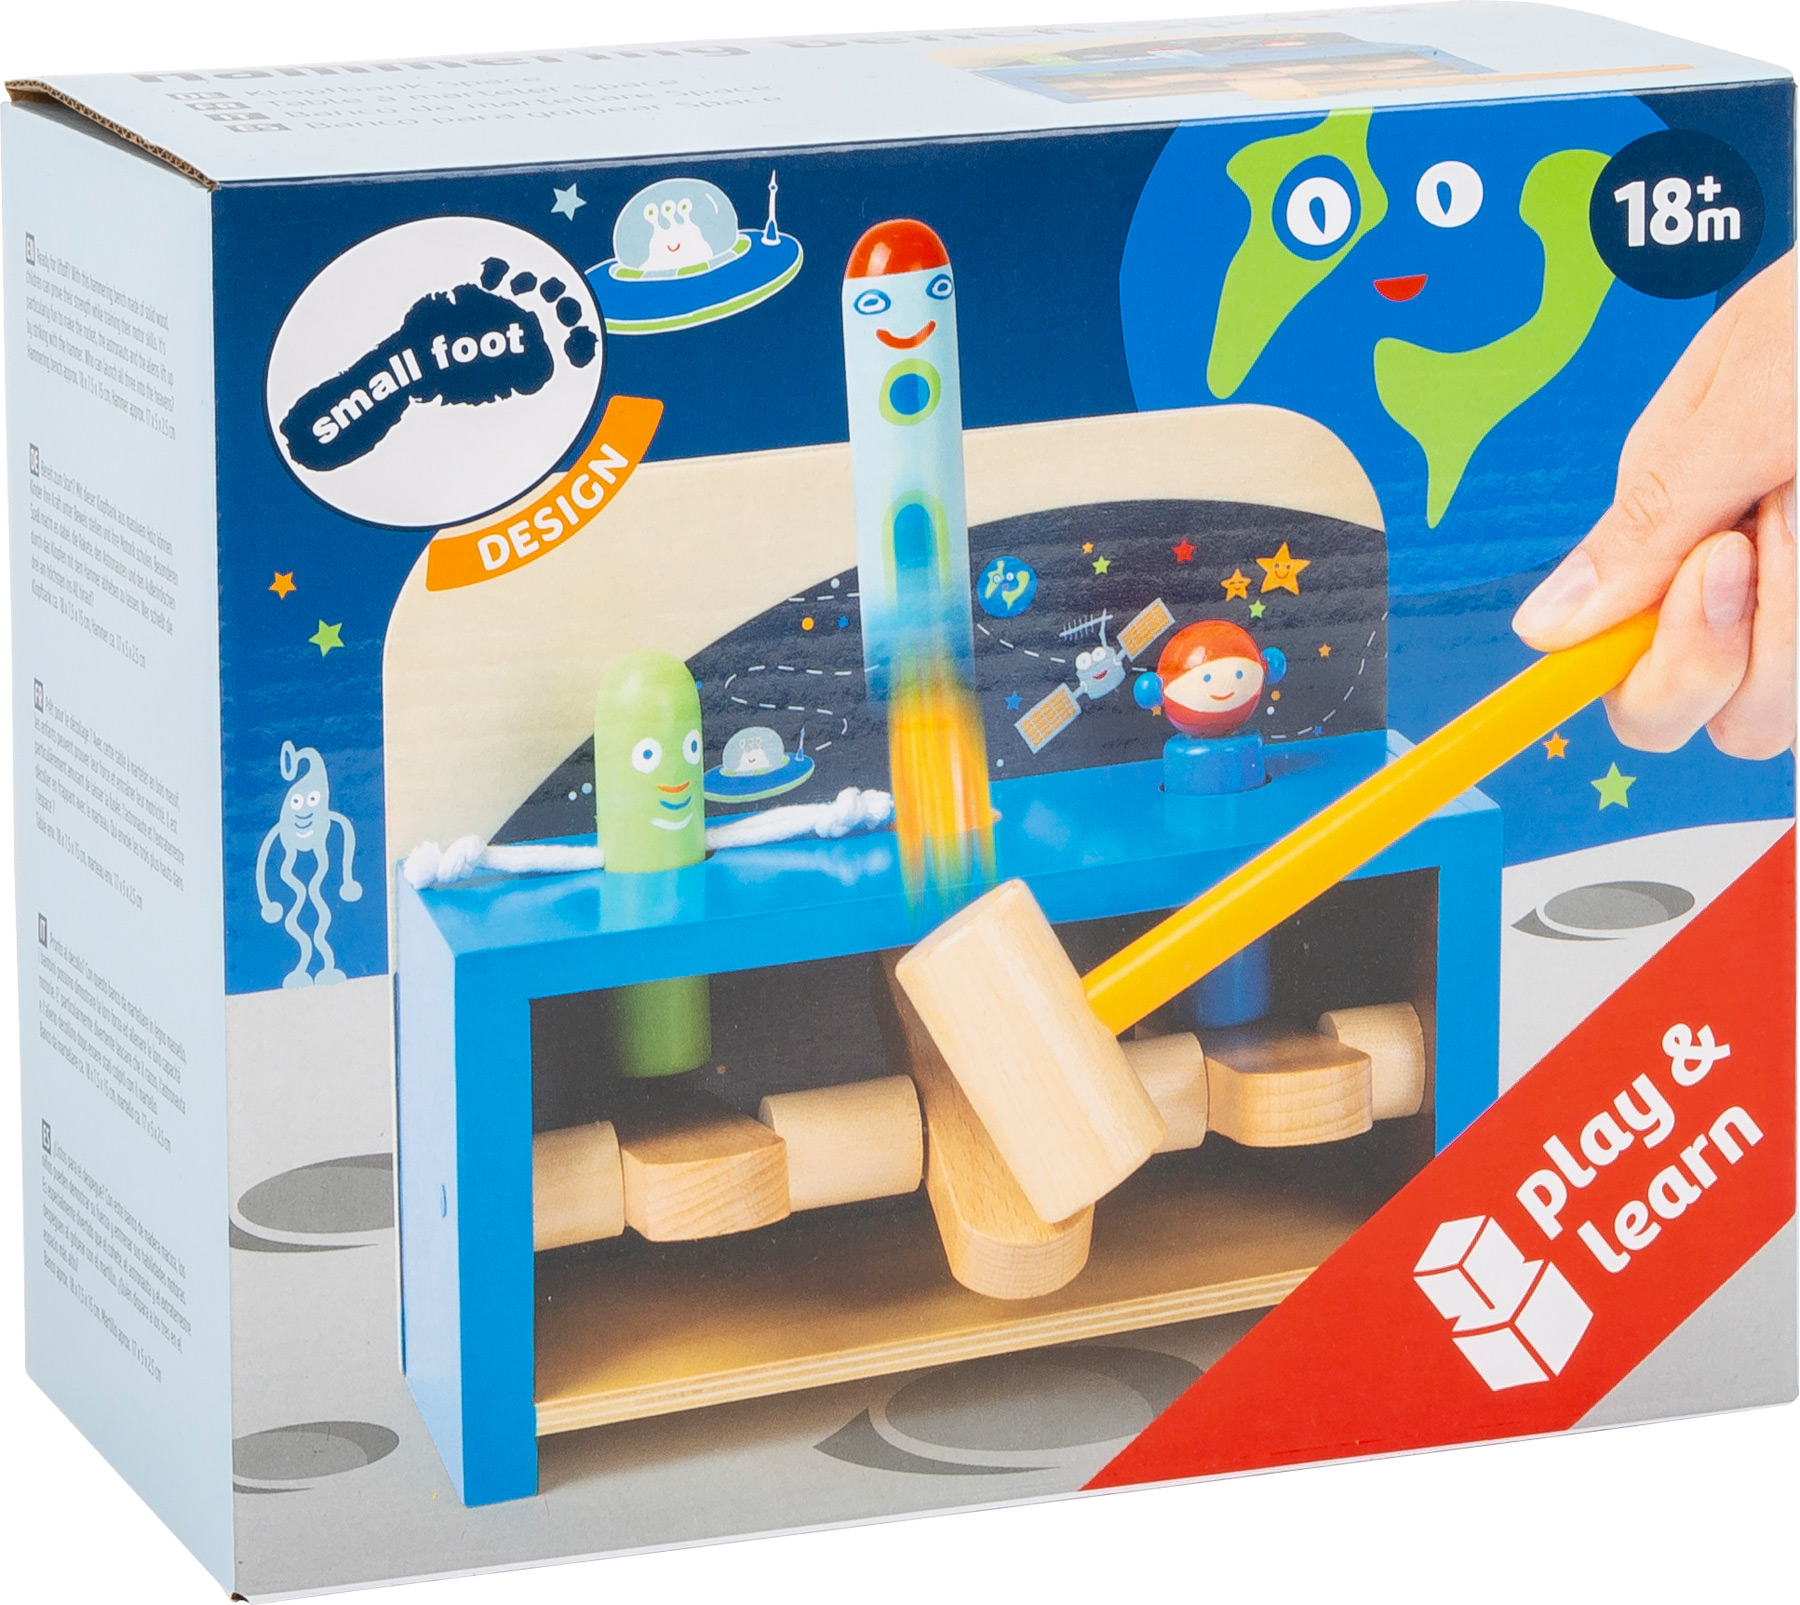 Space themed wooden hammer bench for toddlers from Small Foot Design Toys